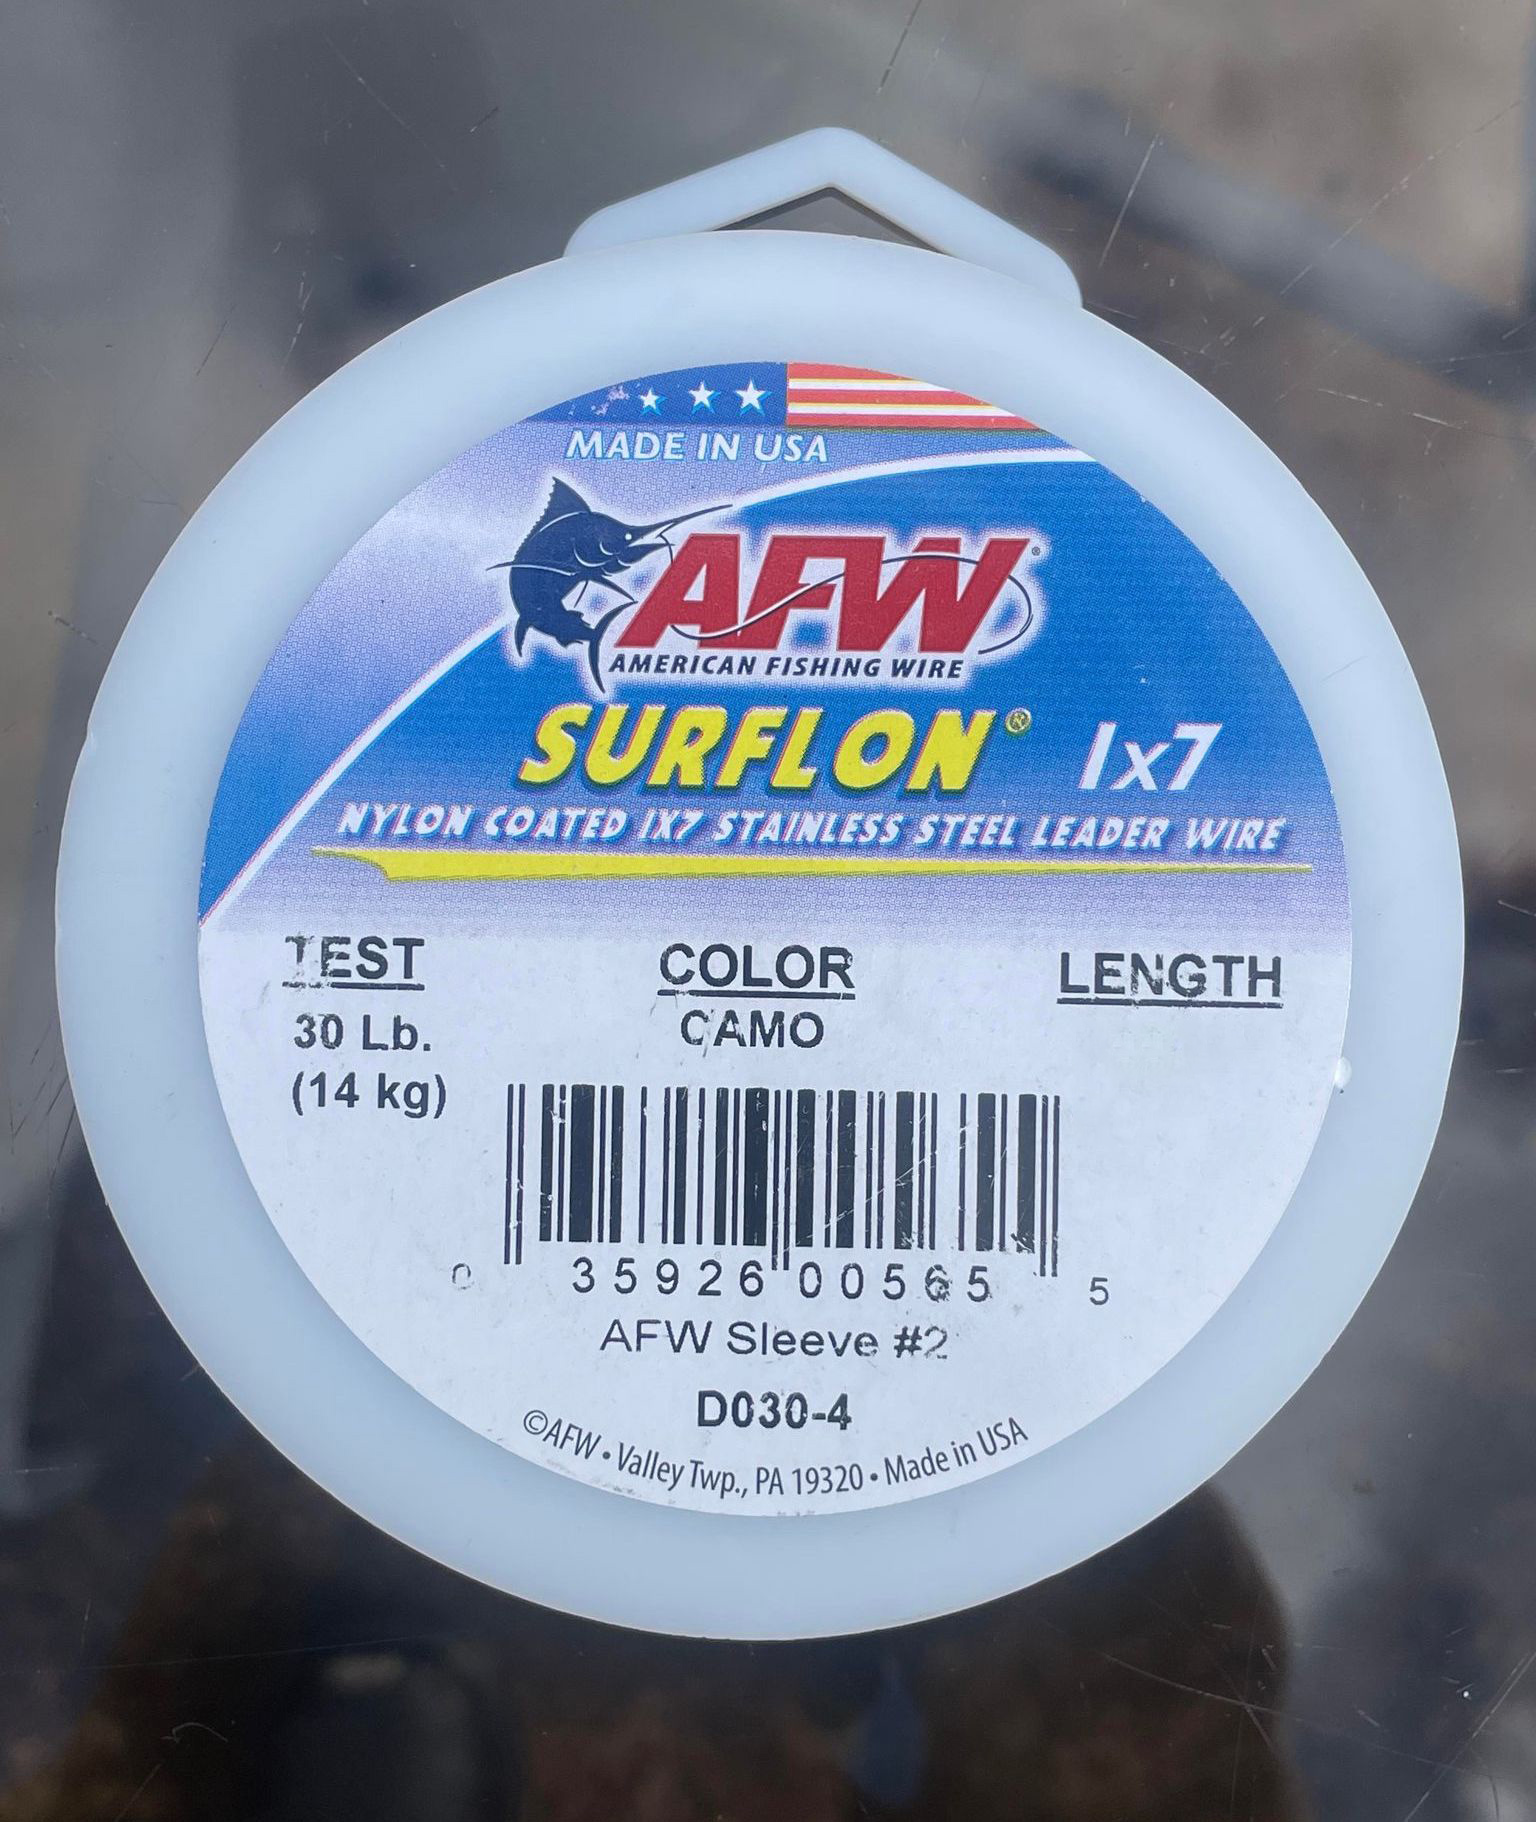 AFW - Surflon Micro Supreme Nylon Coated 7x7 Stainless Steel